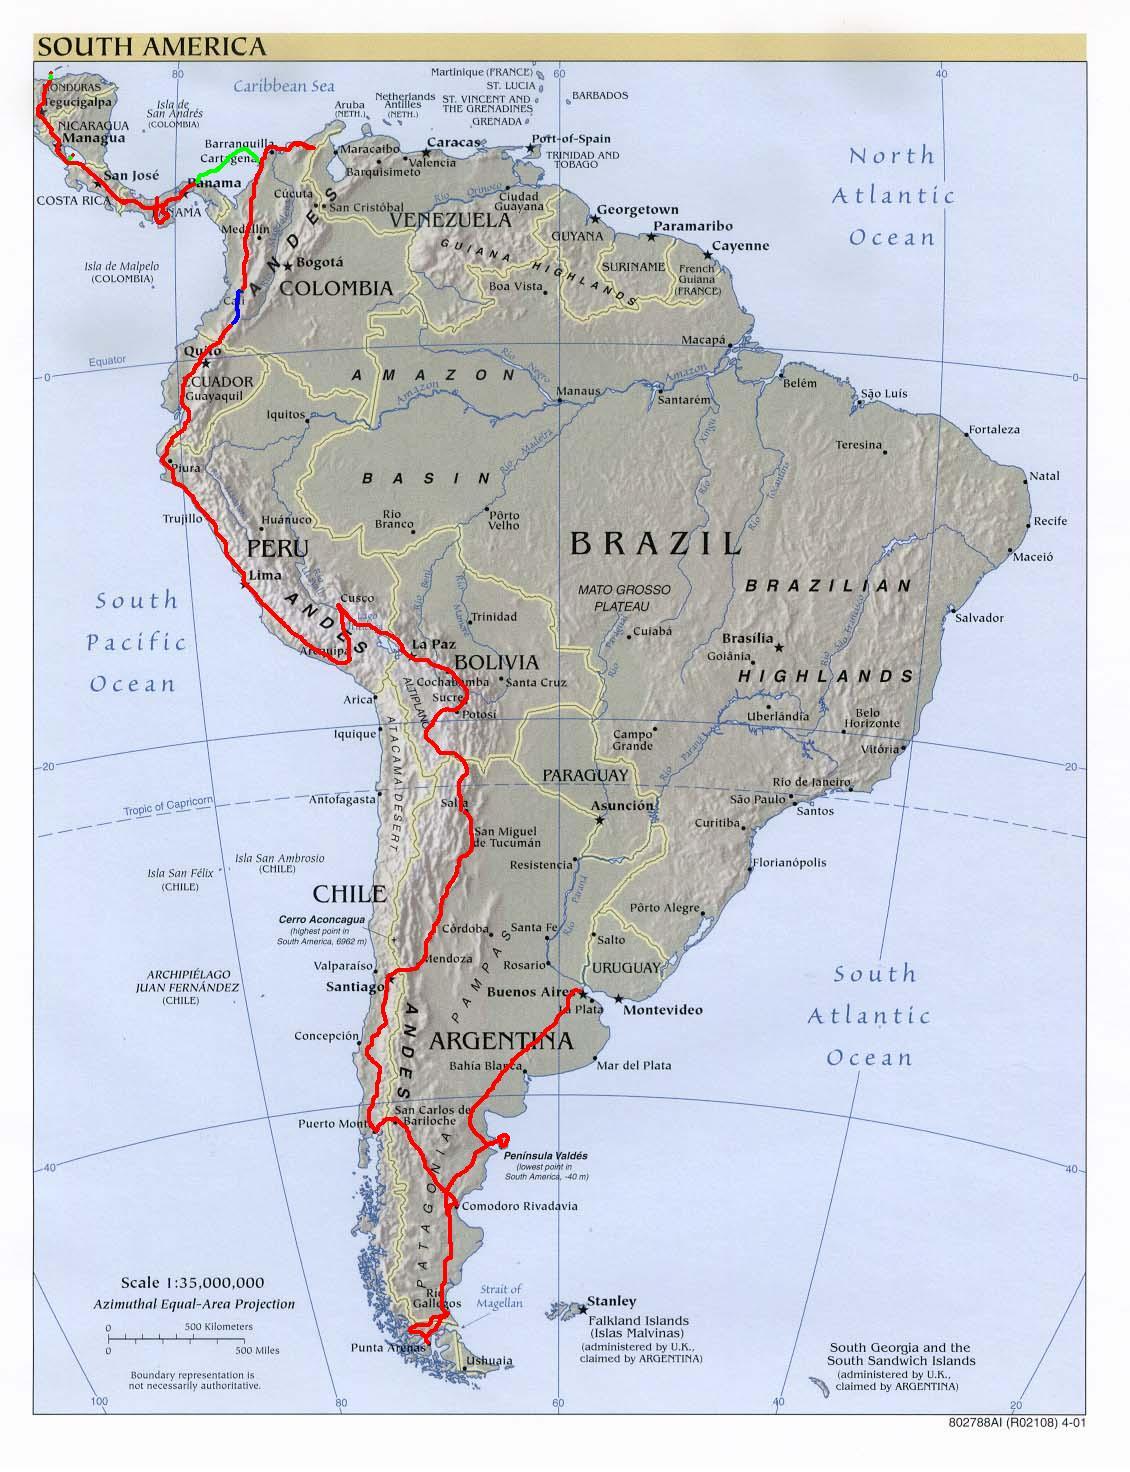 The route through South America